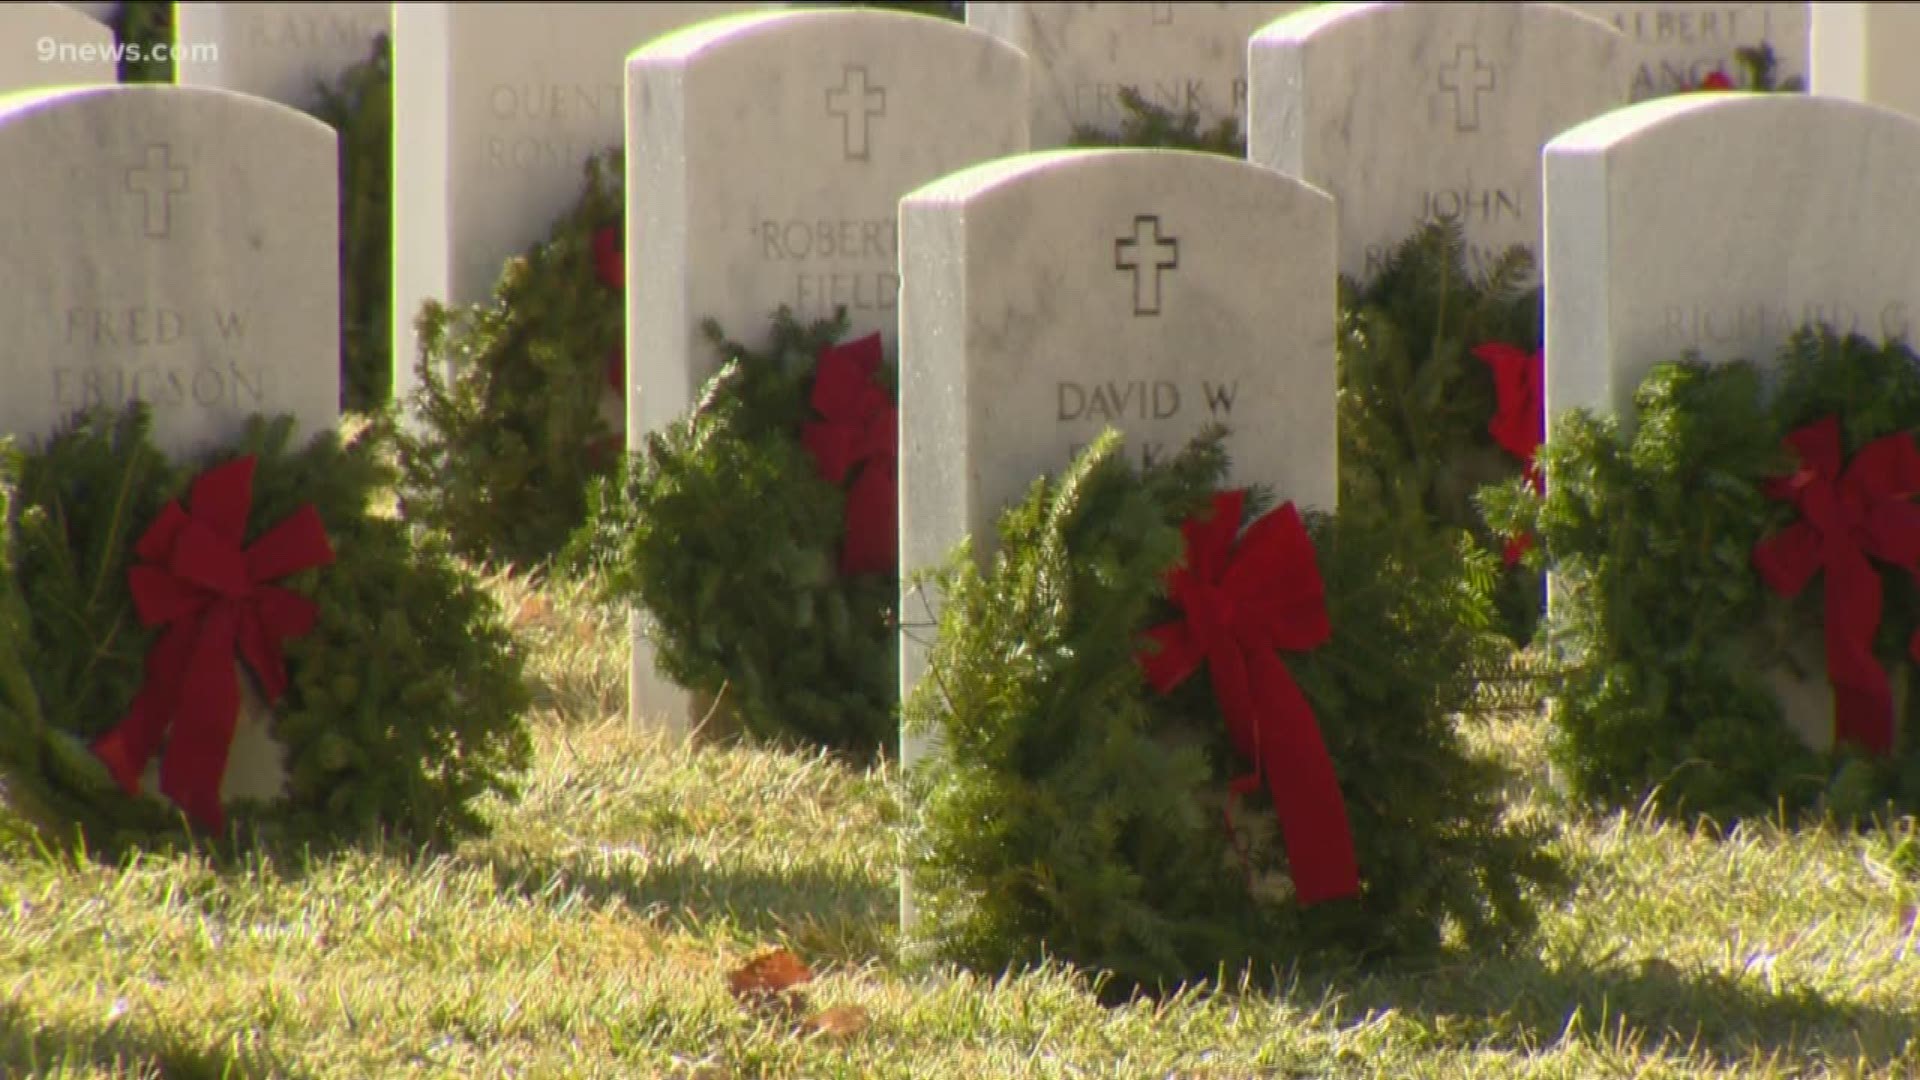 Each year people spend a weekend in December to remember fallen veterans during the holidays. Wreaths Across America decorates gravesites at around 1,600 cemeteries.